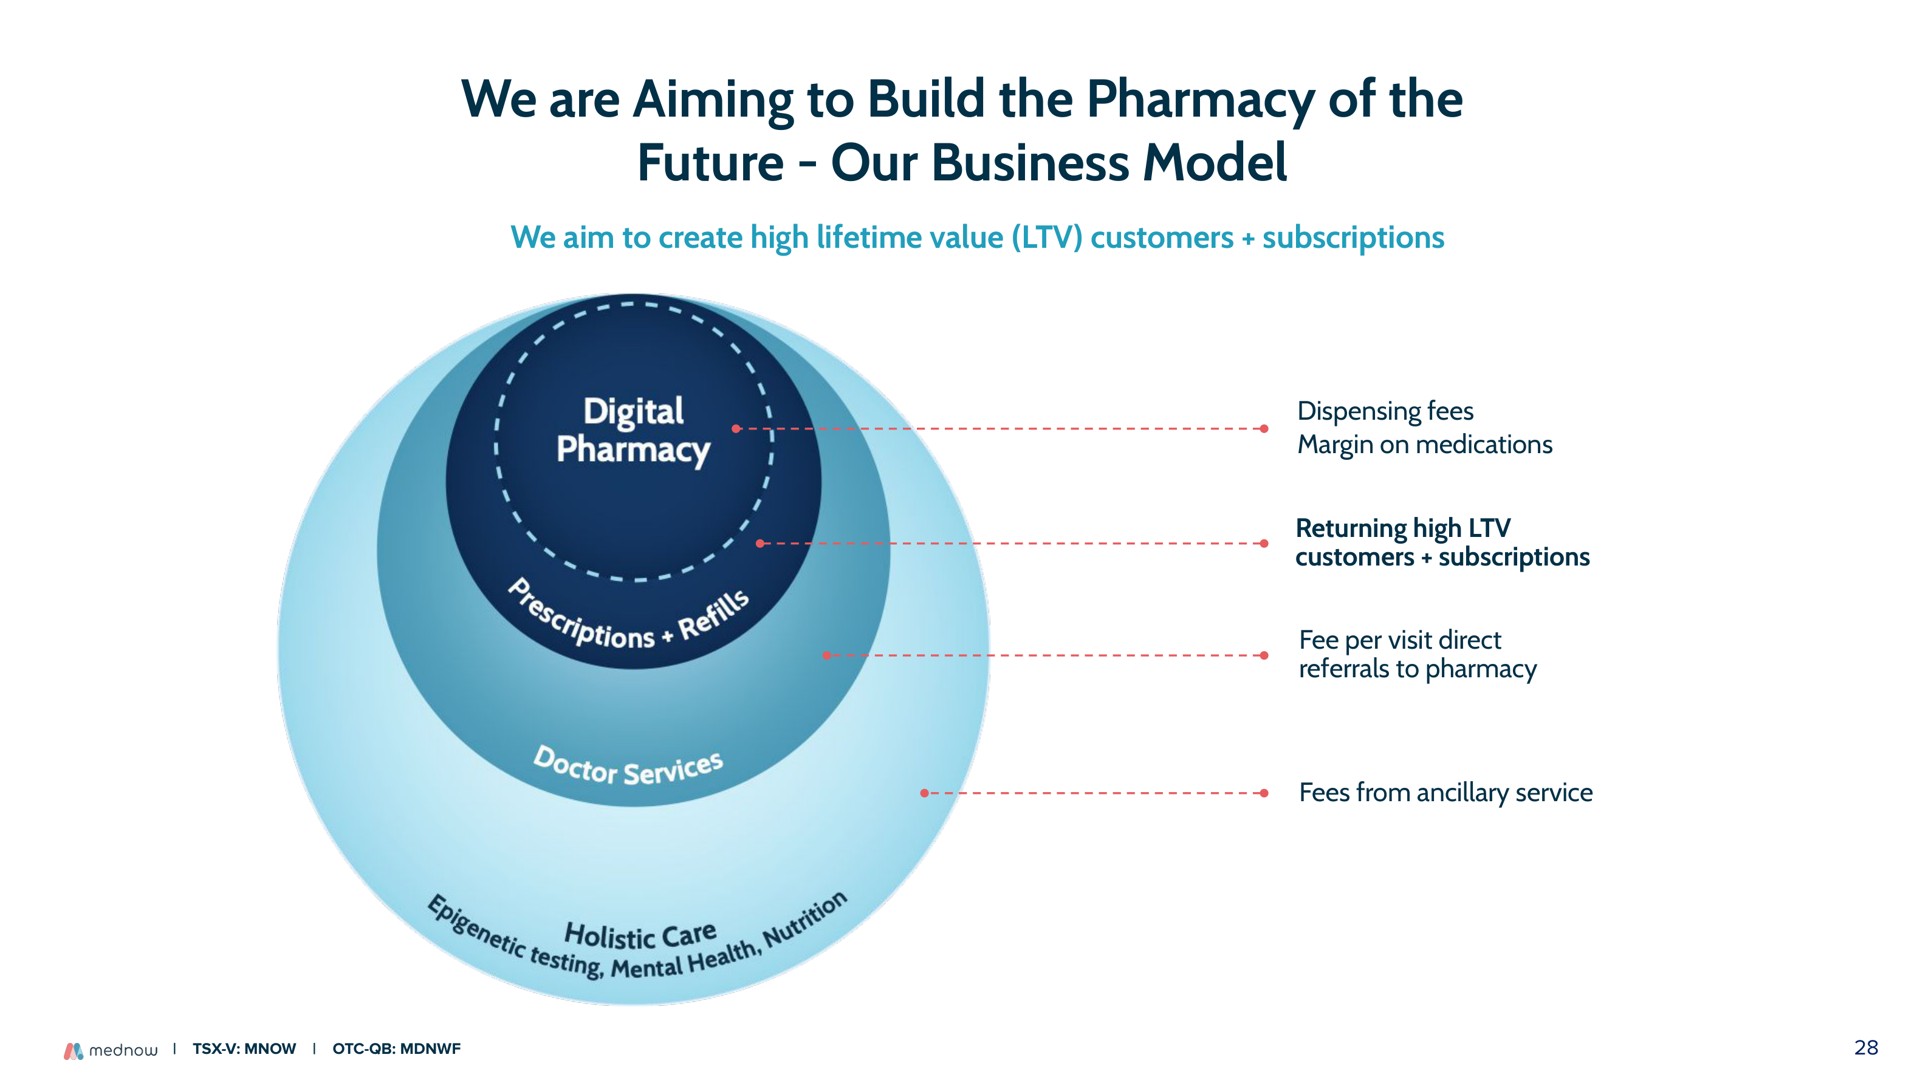 we are aiming to build the pharmacy of the future our business model we aim to create high lifetime value customers subscriptions dispensing fees margin on medications returning high customers subscriptions fee per visit direct referrals to pharmacy fees from ancillary service | Mednow